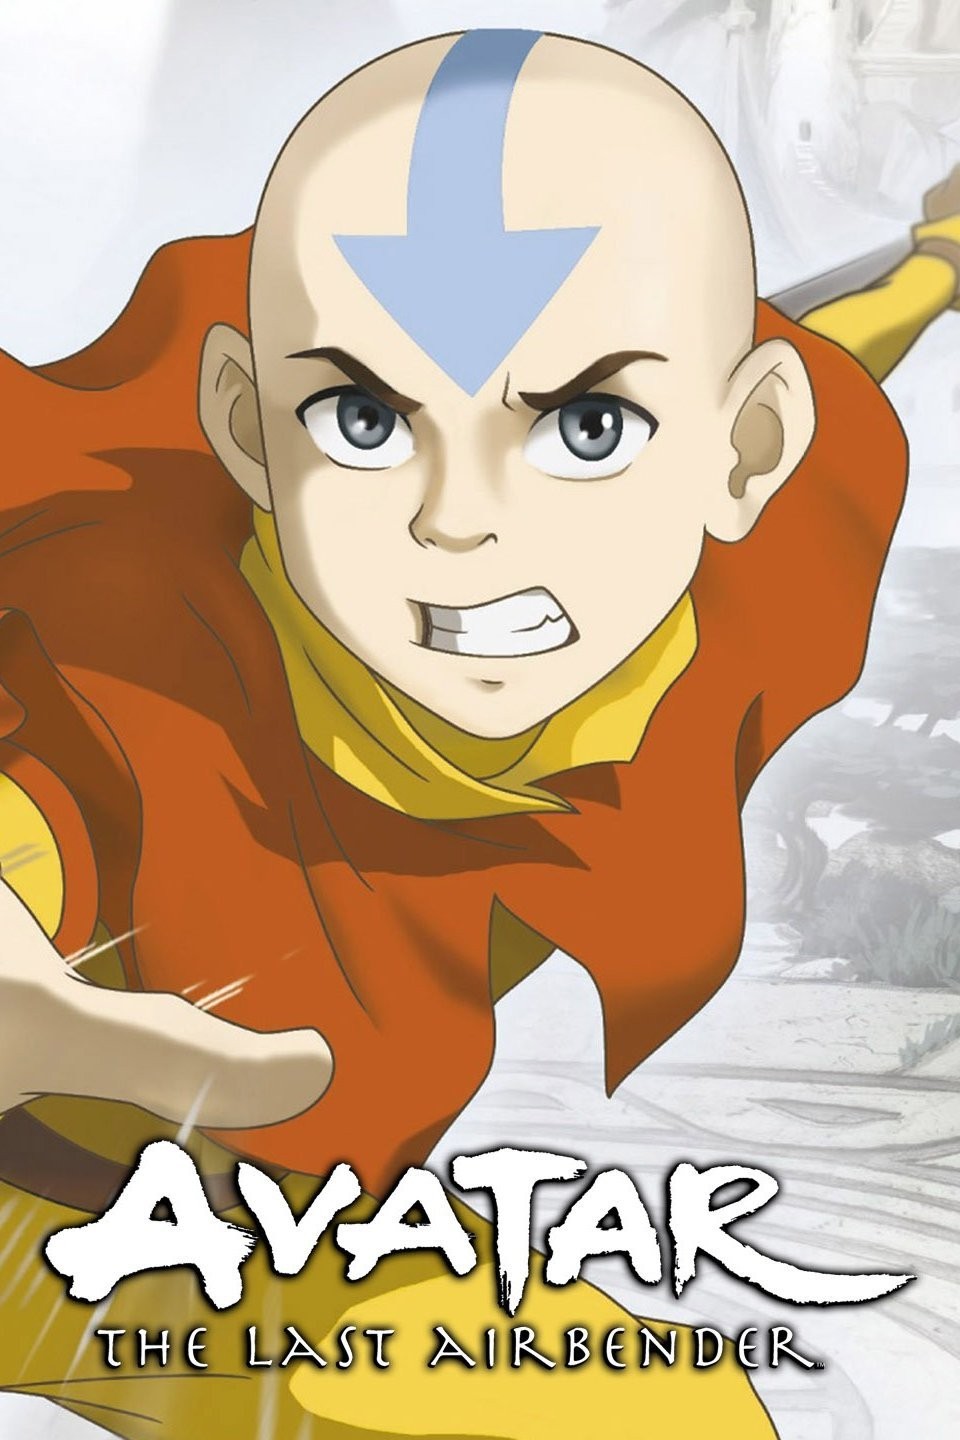 The Best Anime is Back Avatar The Last Airbender  YouTube